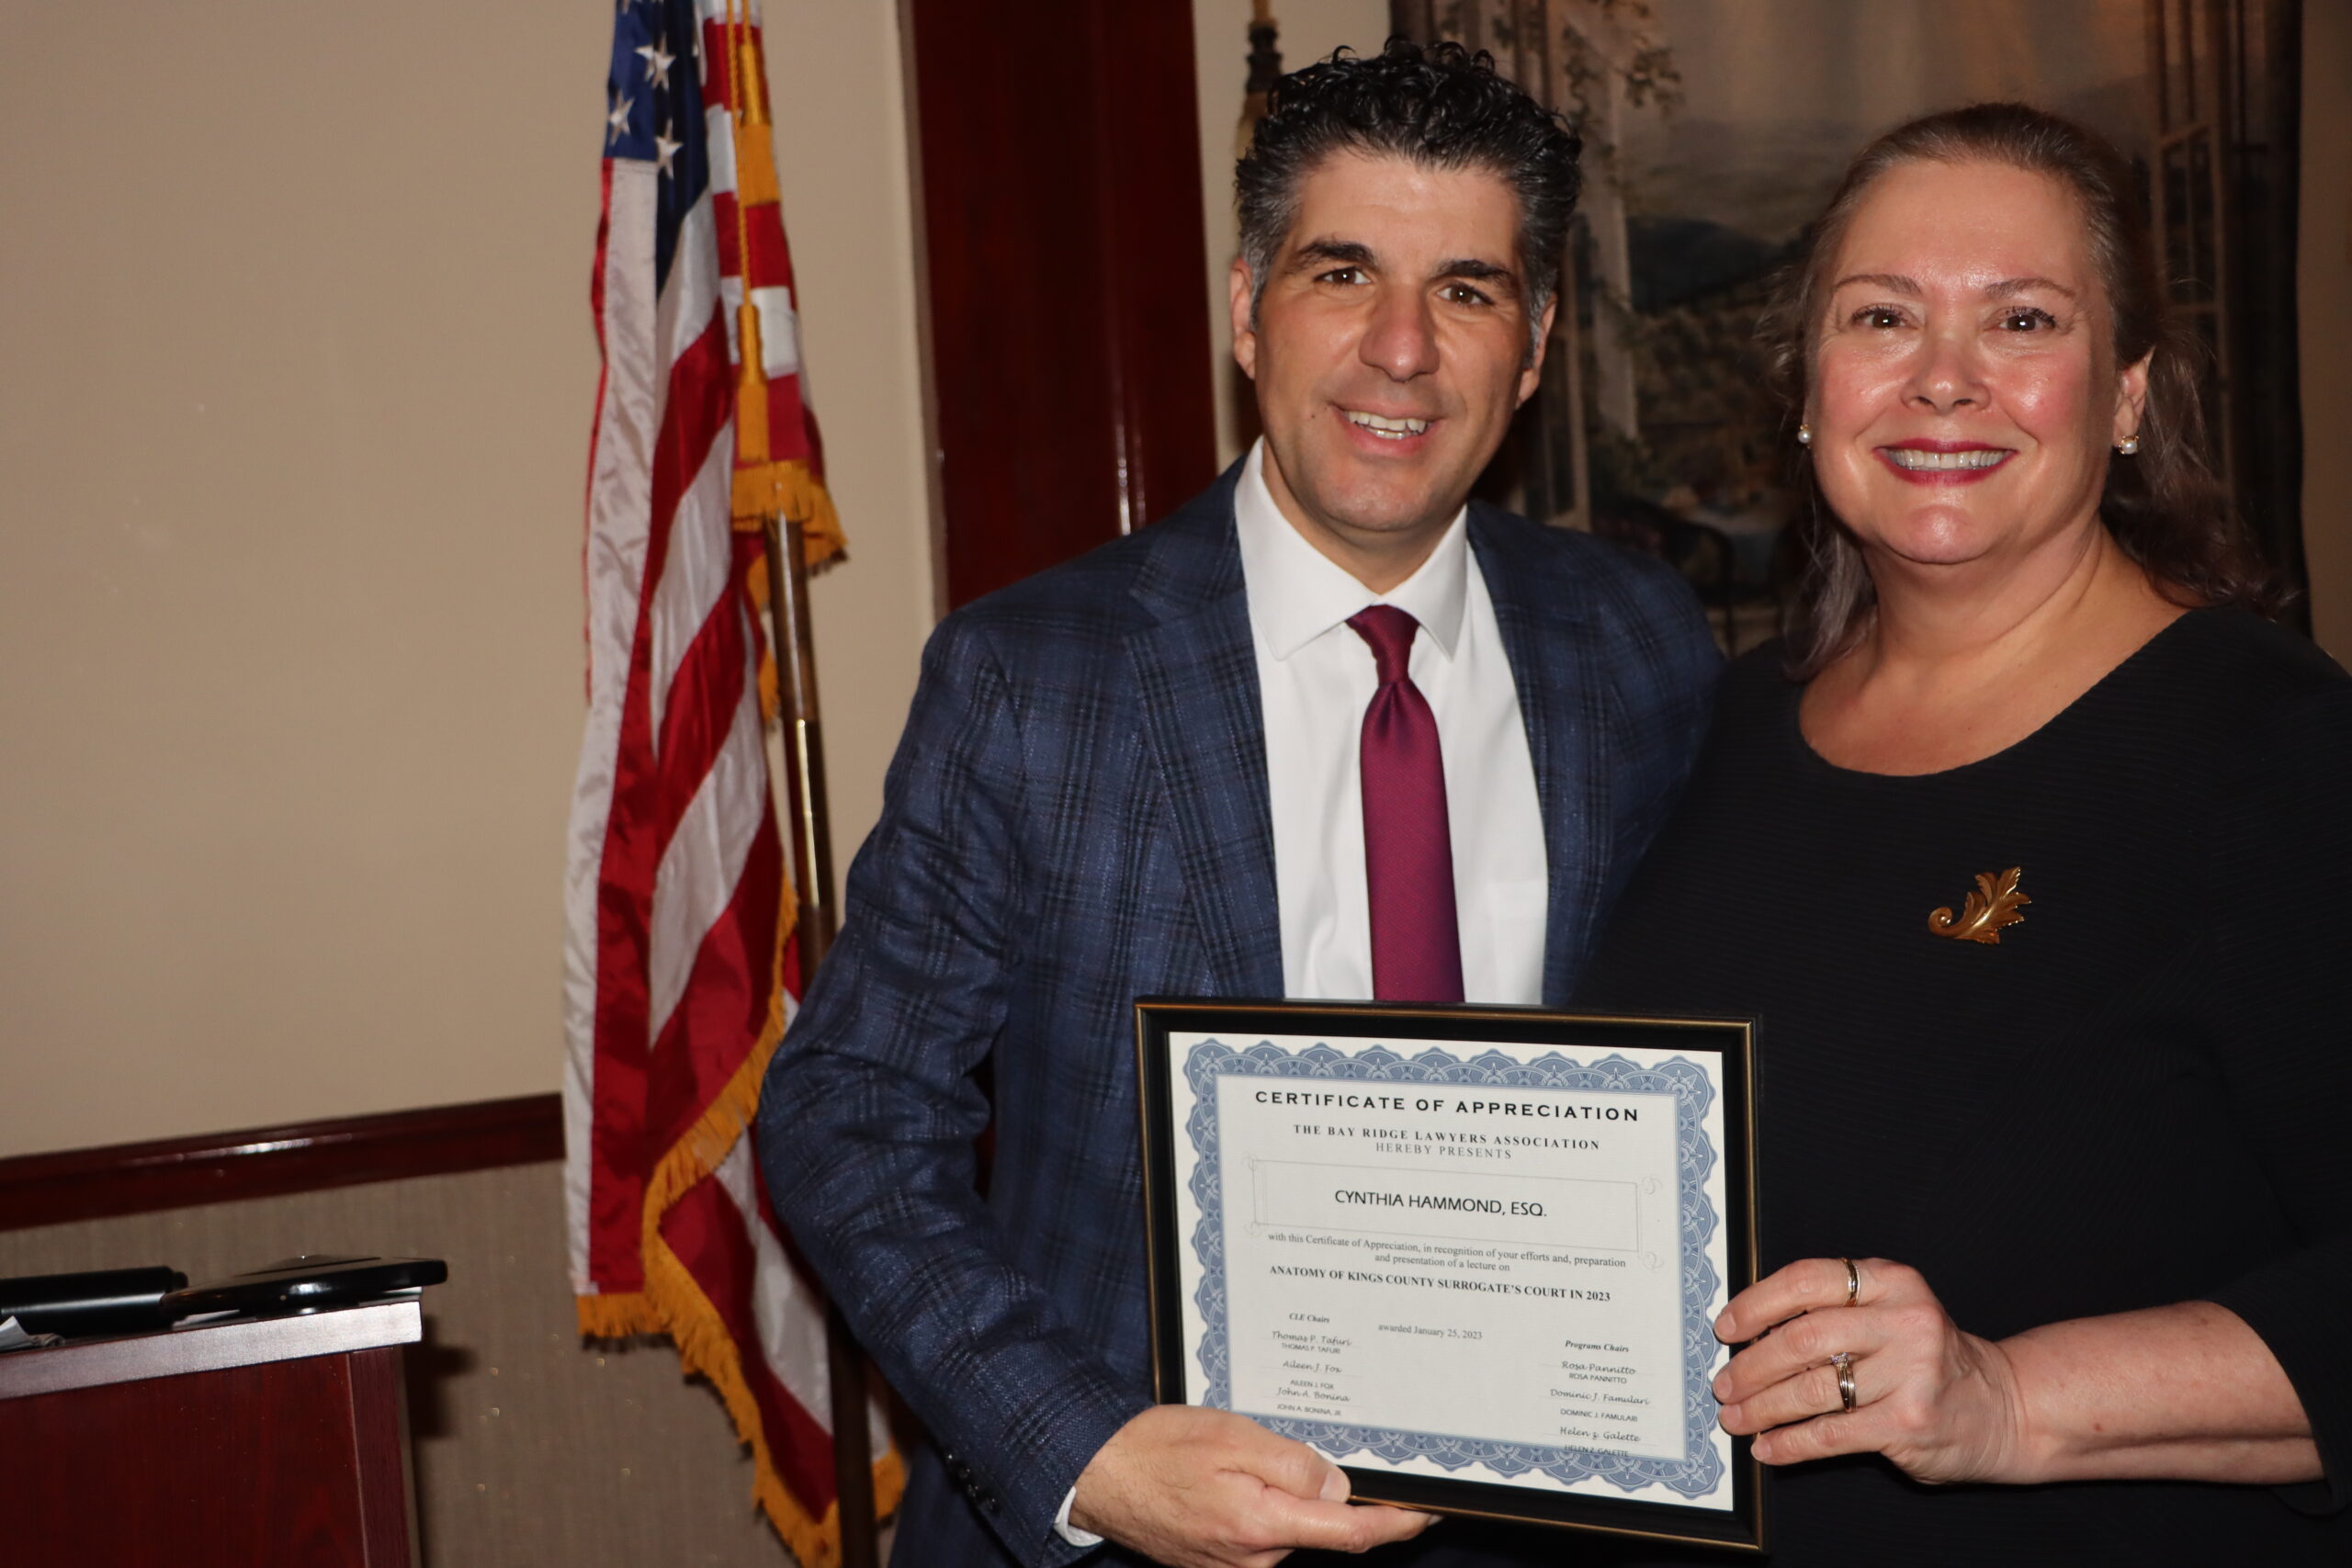 President Dominic Famulari presents Cynthia Hammond with a certificate for presenting a continuing legal education seminar entitled, 